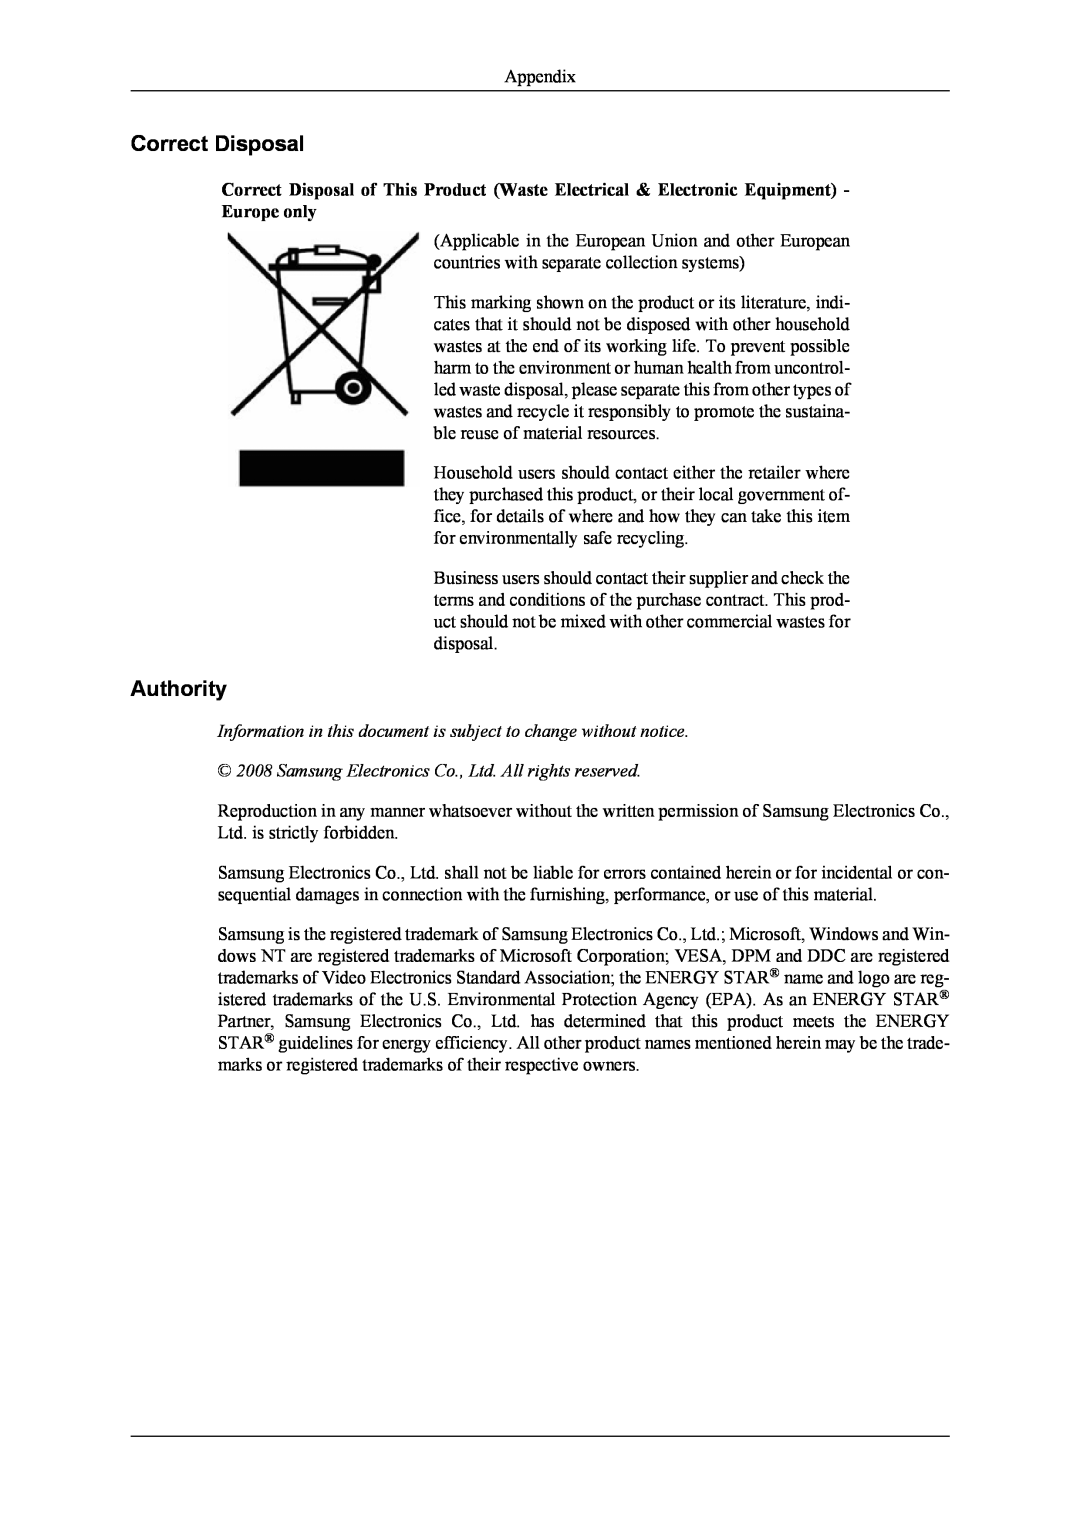 Samsung LS26TWHSUV/UF manual Correct Disposal, Authority, Information in this document is subject to change without notice 